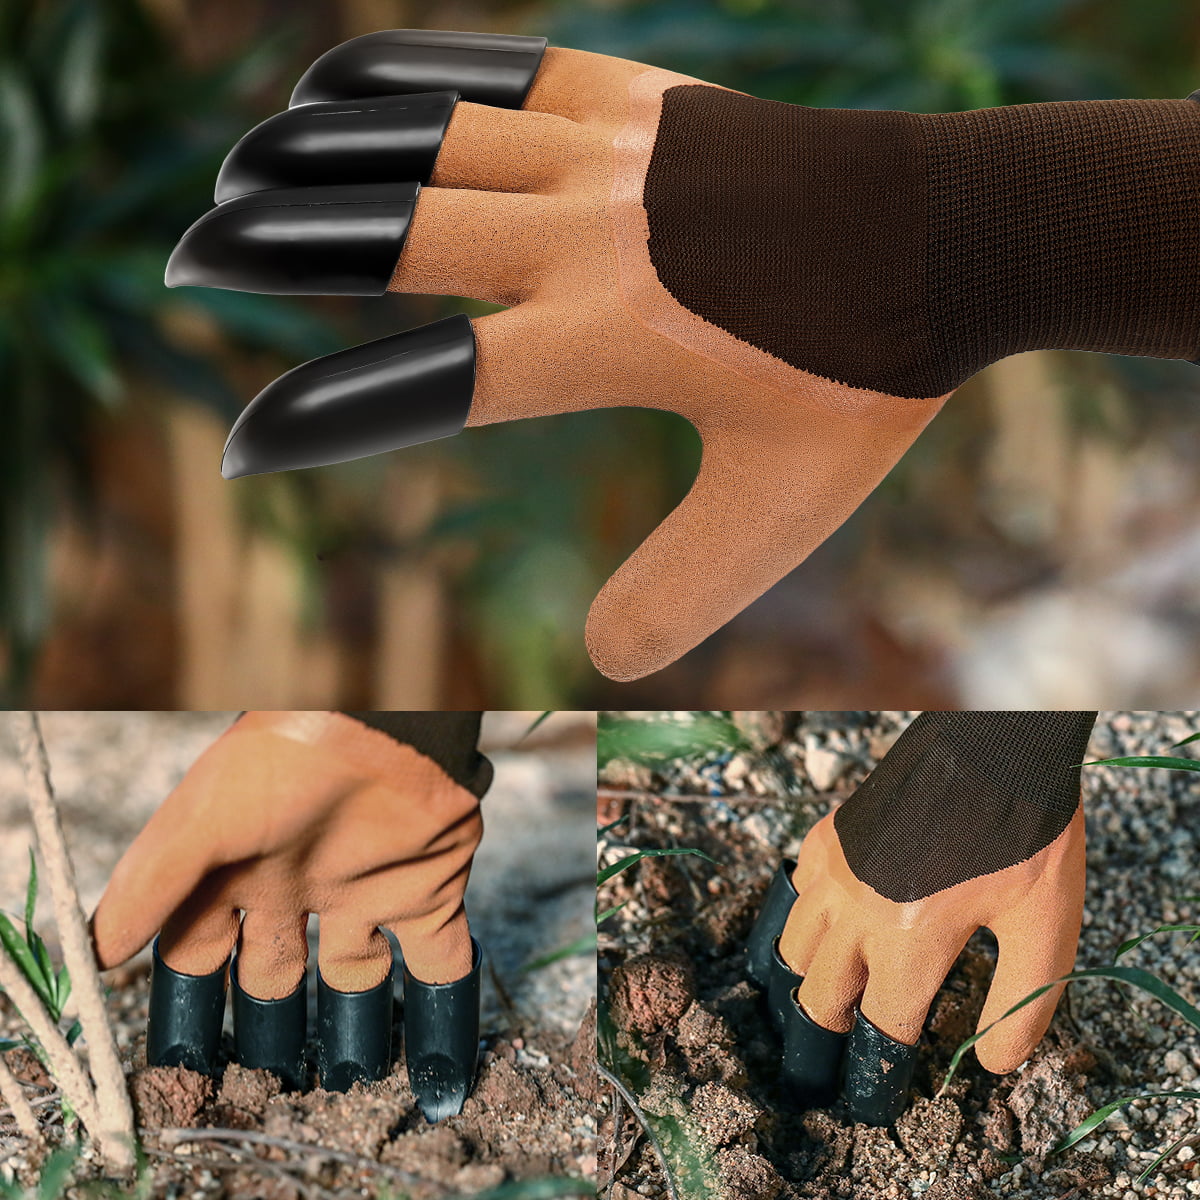 ABS Plastic Claw Garden Gardening Gloves For Digging & Planting 